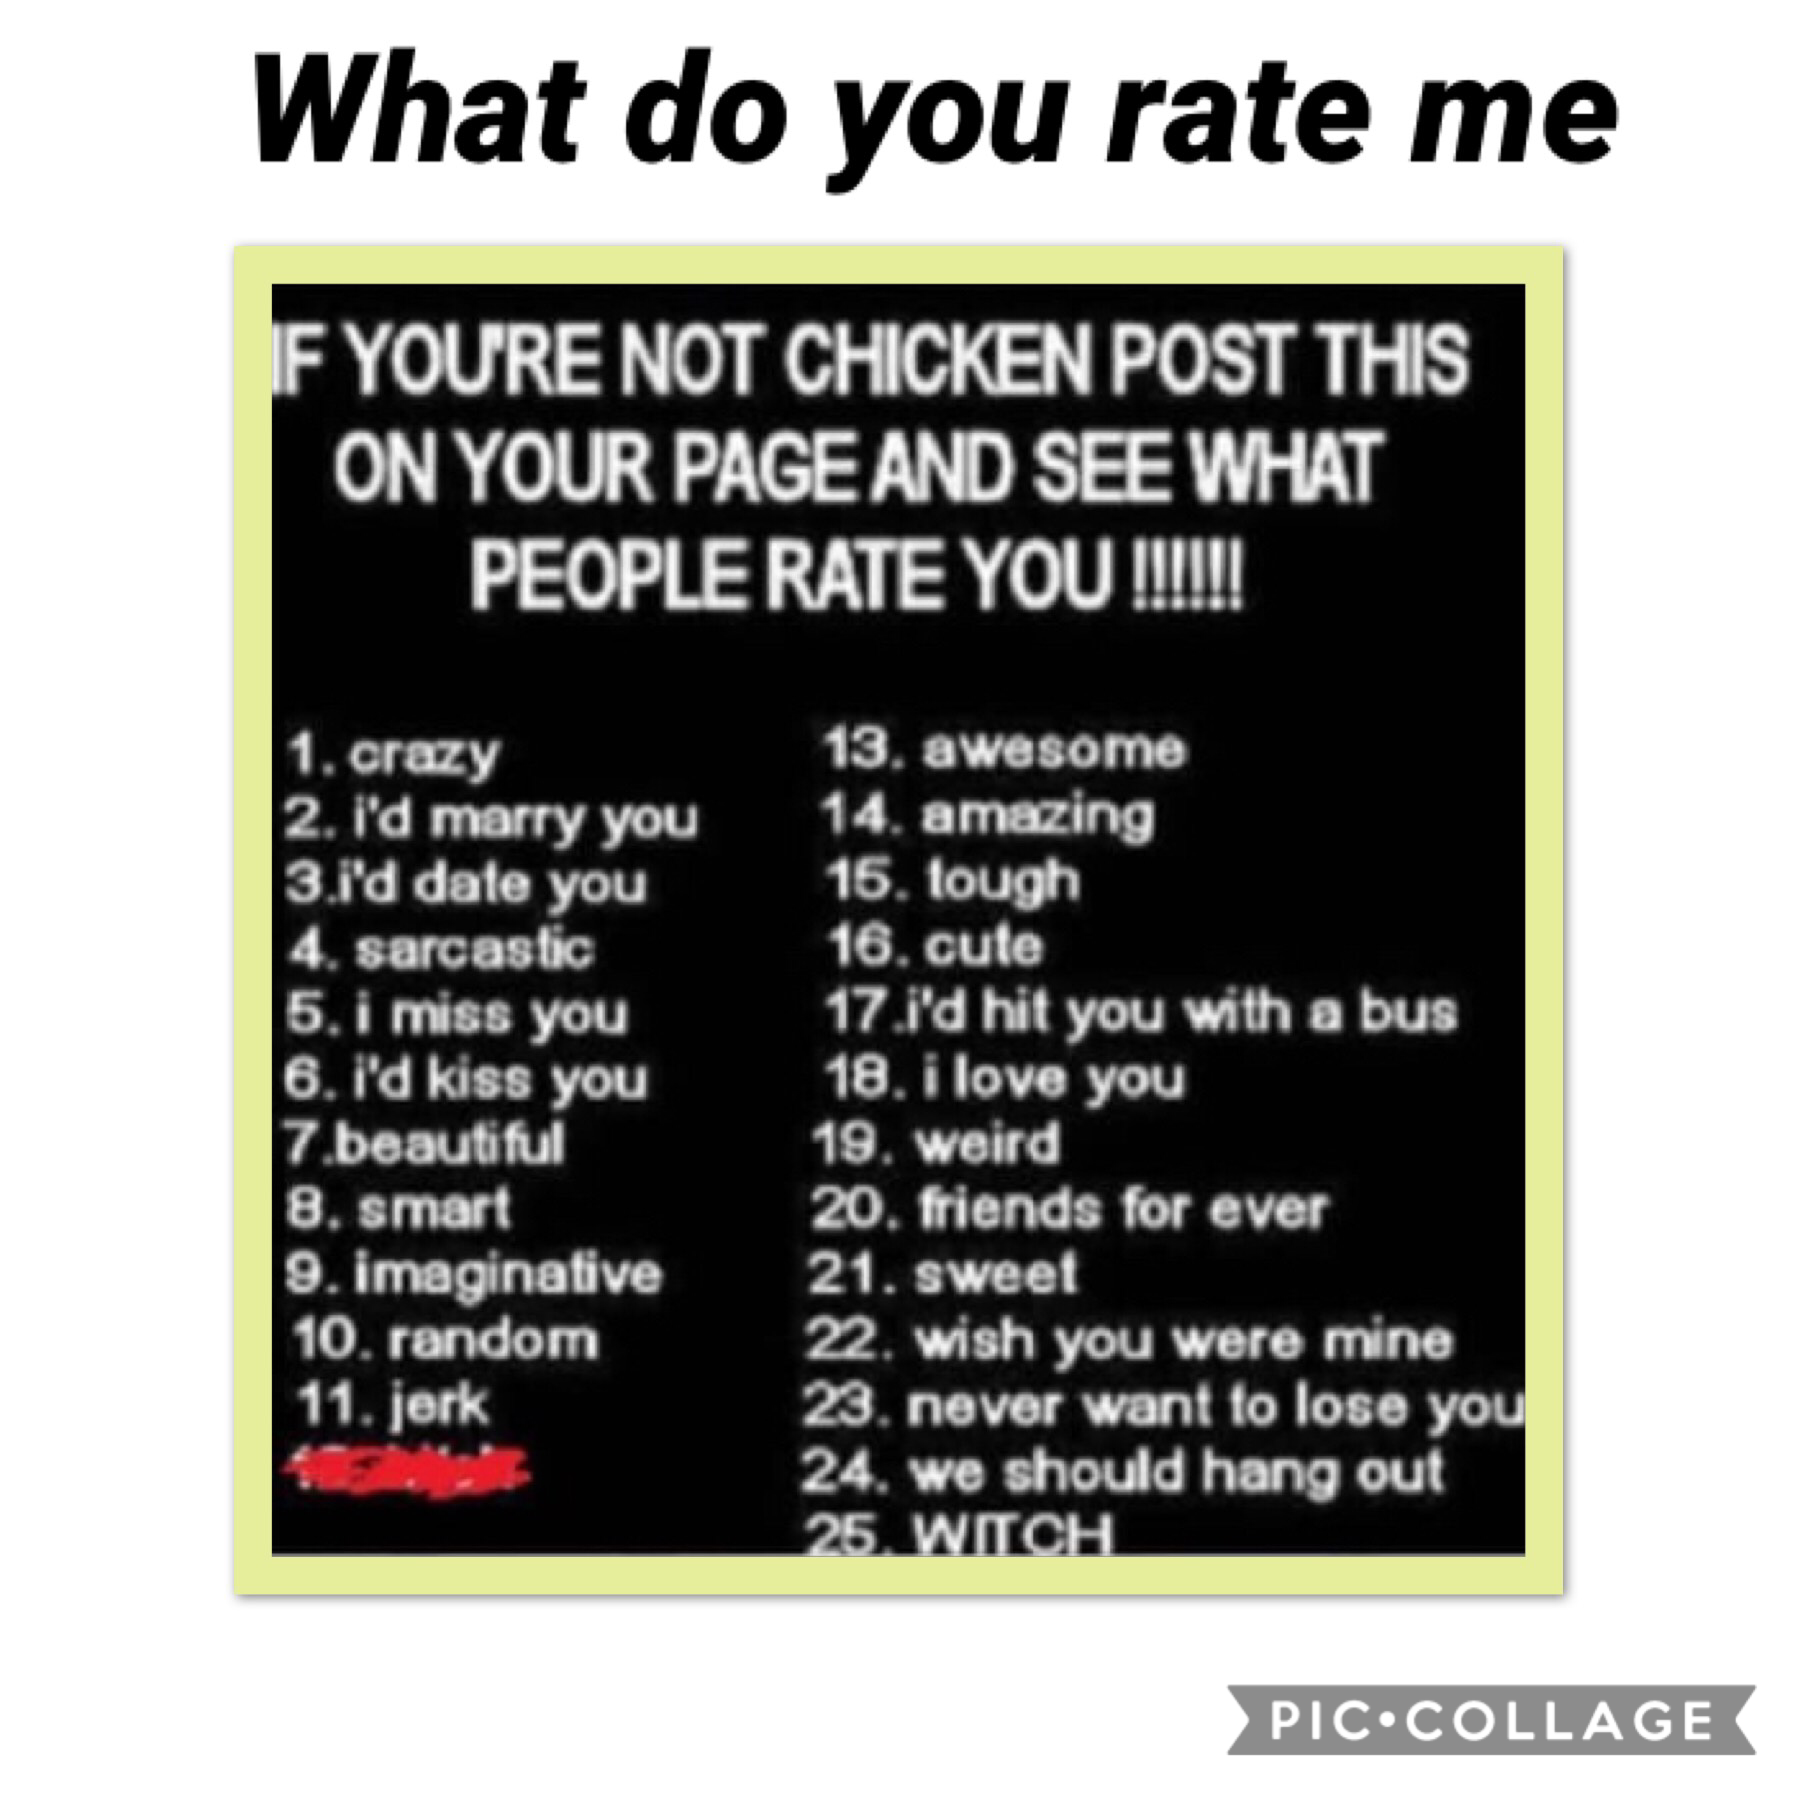 What would you rate me